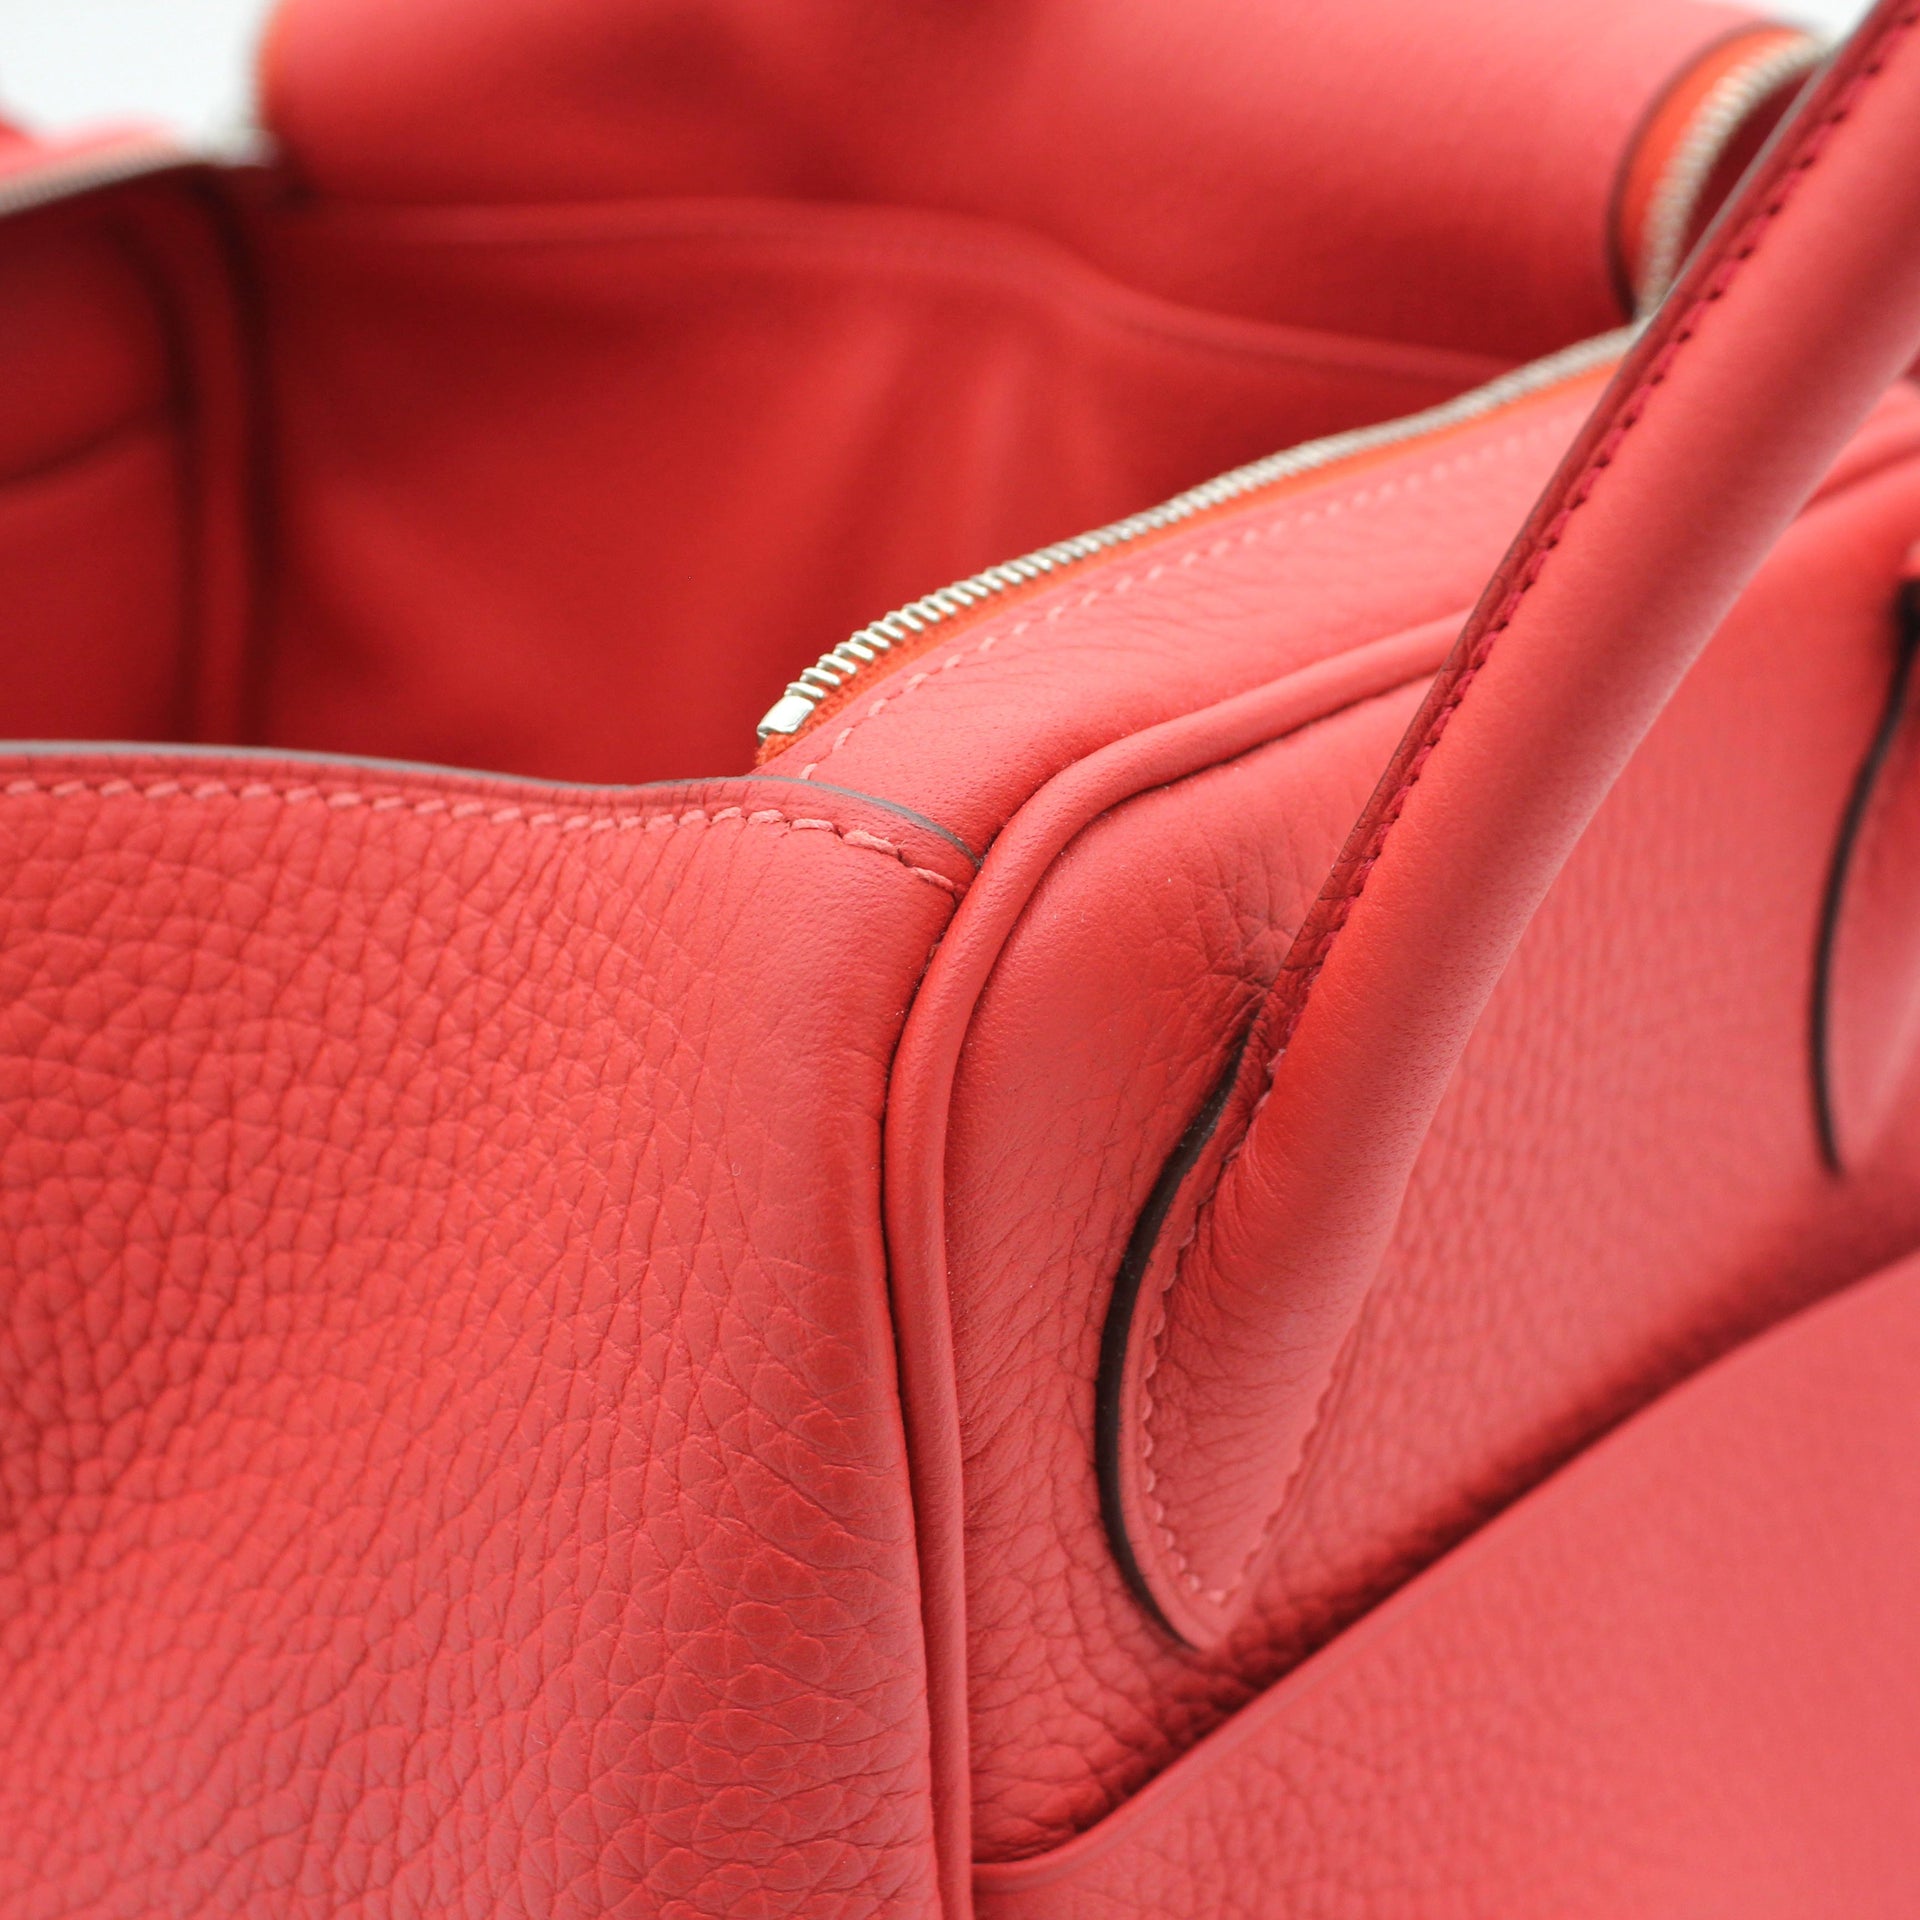 A ROUGE TOMATE CLÉMENCE LEATHER LINDY 26 WITH PALLADIUM HARDWARE, HERMÈS,  2016